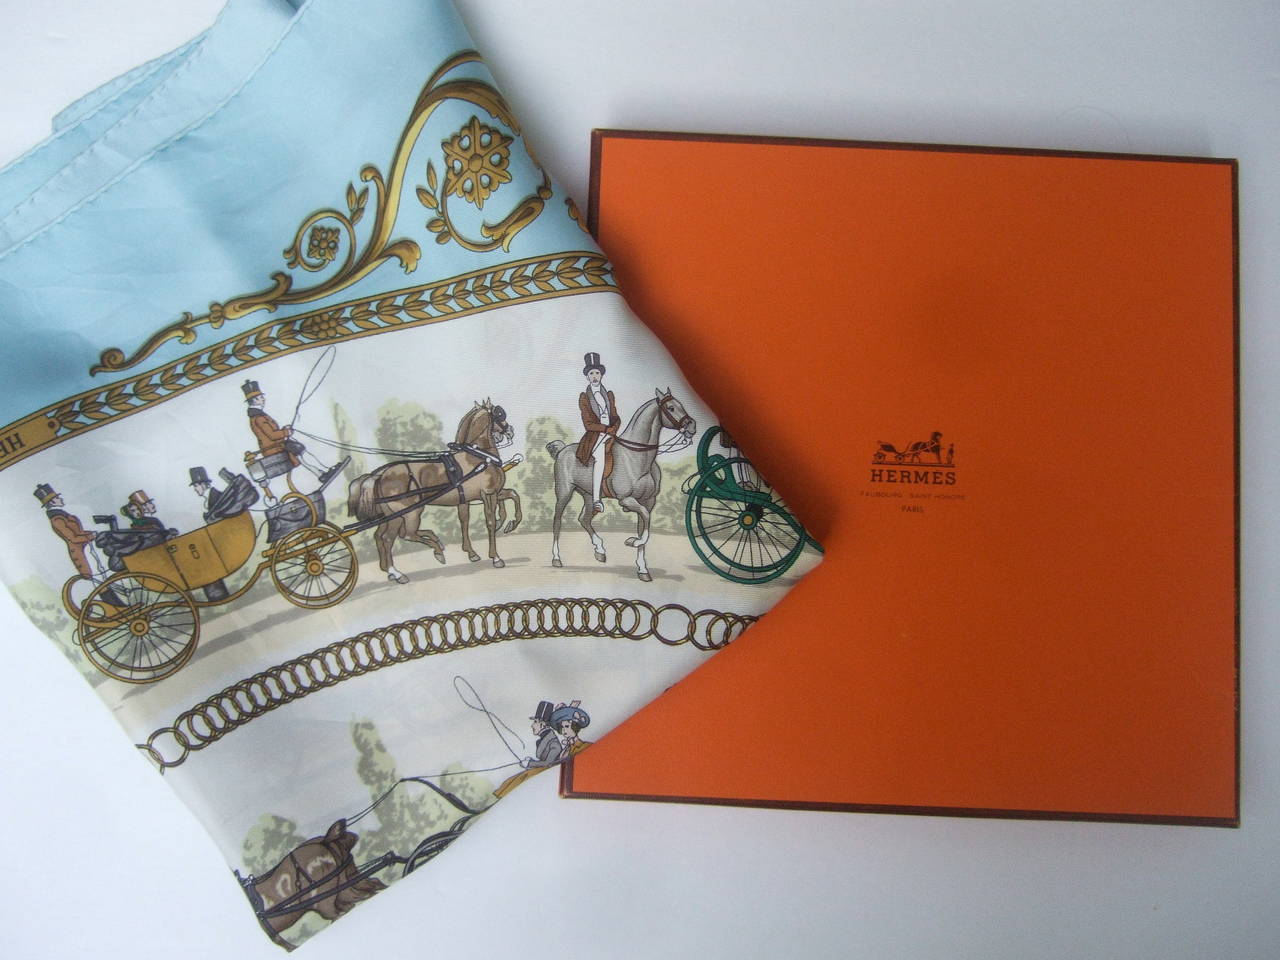 Hermes Paris La Promenade De Longchamps silk scarf in Hermes Box
The elegant designer scarf is illustrated with a wreath of horse drawn 
carriages. The center graphics capture a roamntic courting couple   

The corner edges are a luminous ice